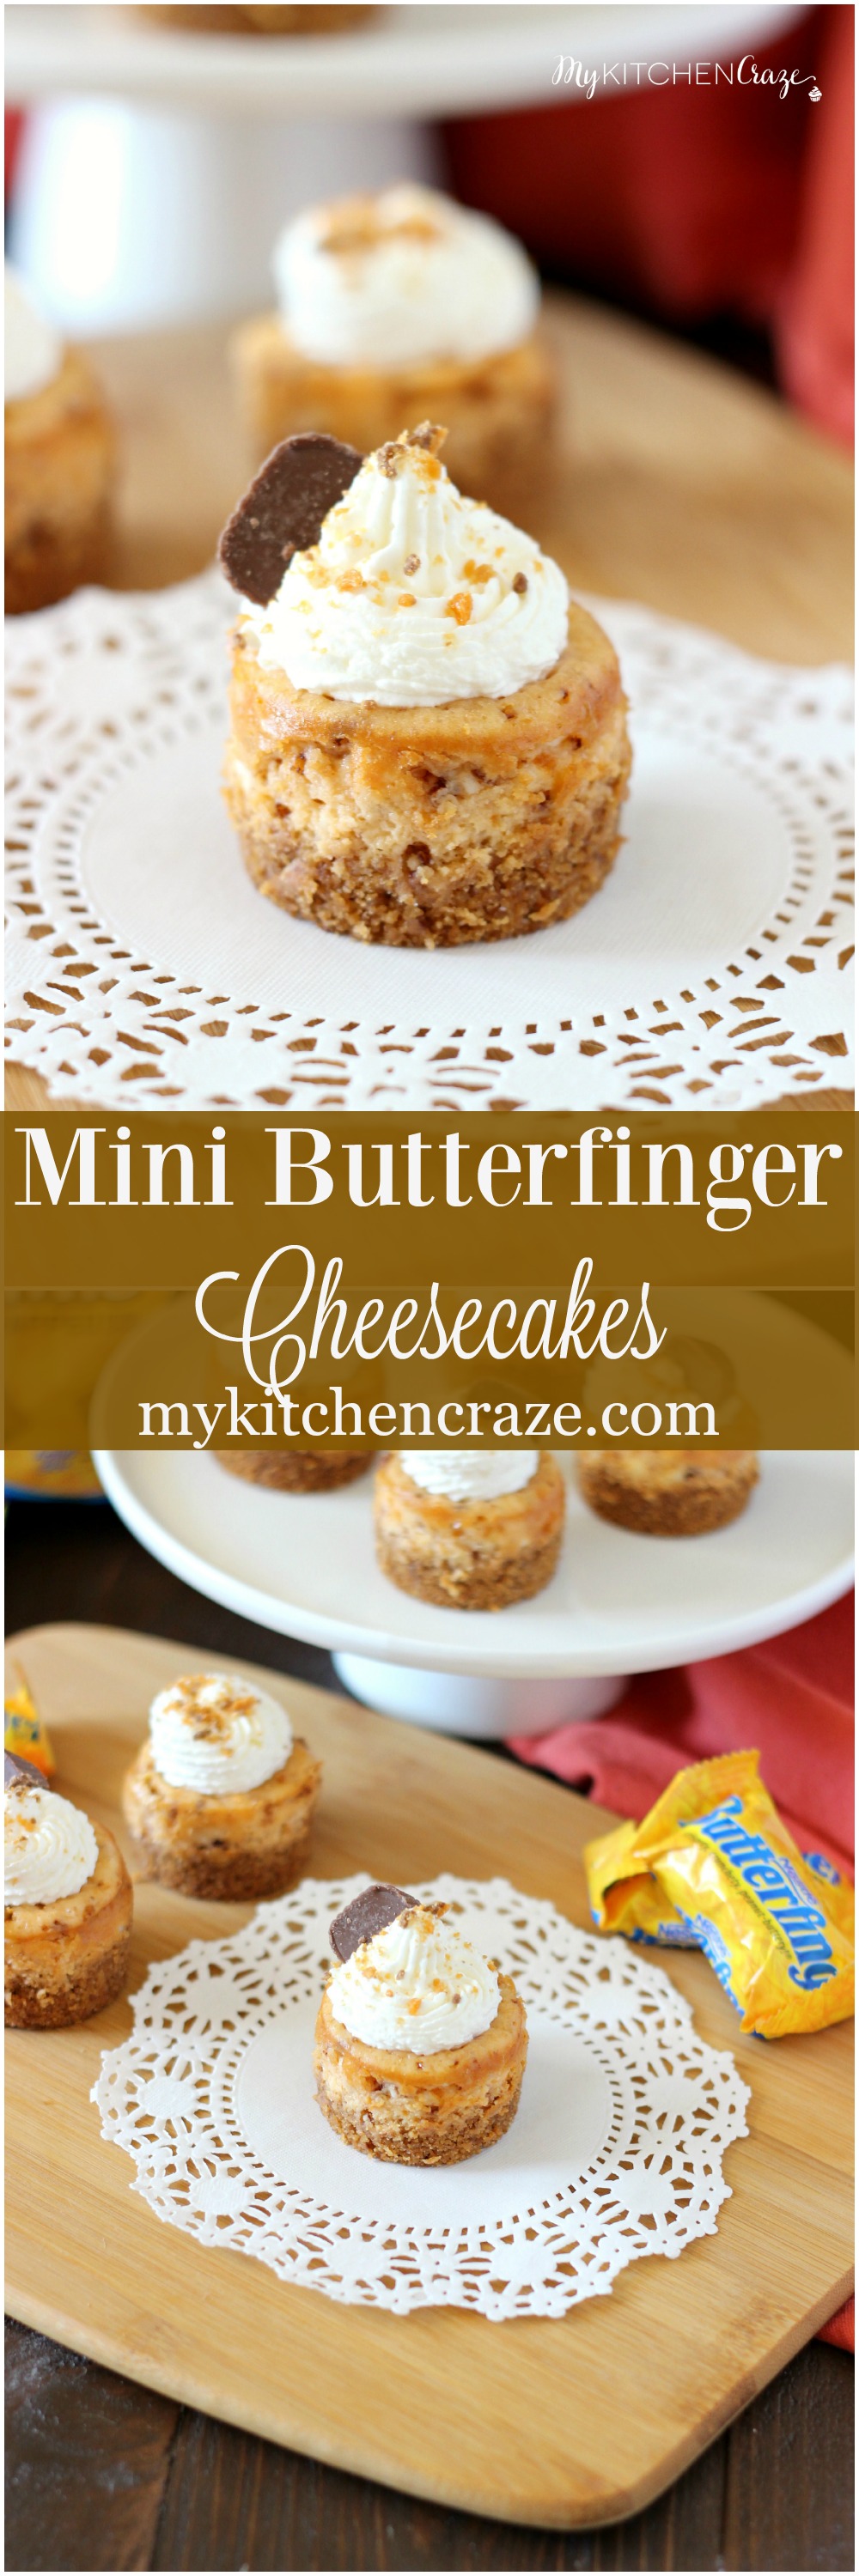 Mini Butterfinger Cheesecakes ~ mykitchencraze.com ~ Delicious cheesecakes swirled with butterfingers candies and topped with whipped cream! Yum! #ReinventSweet #ad